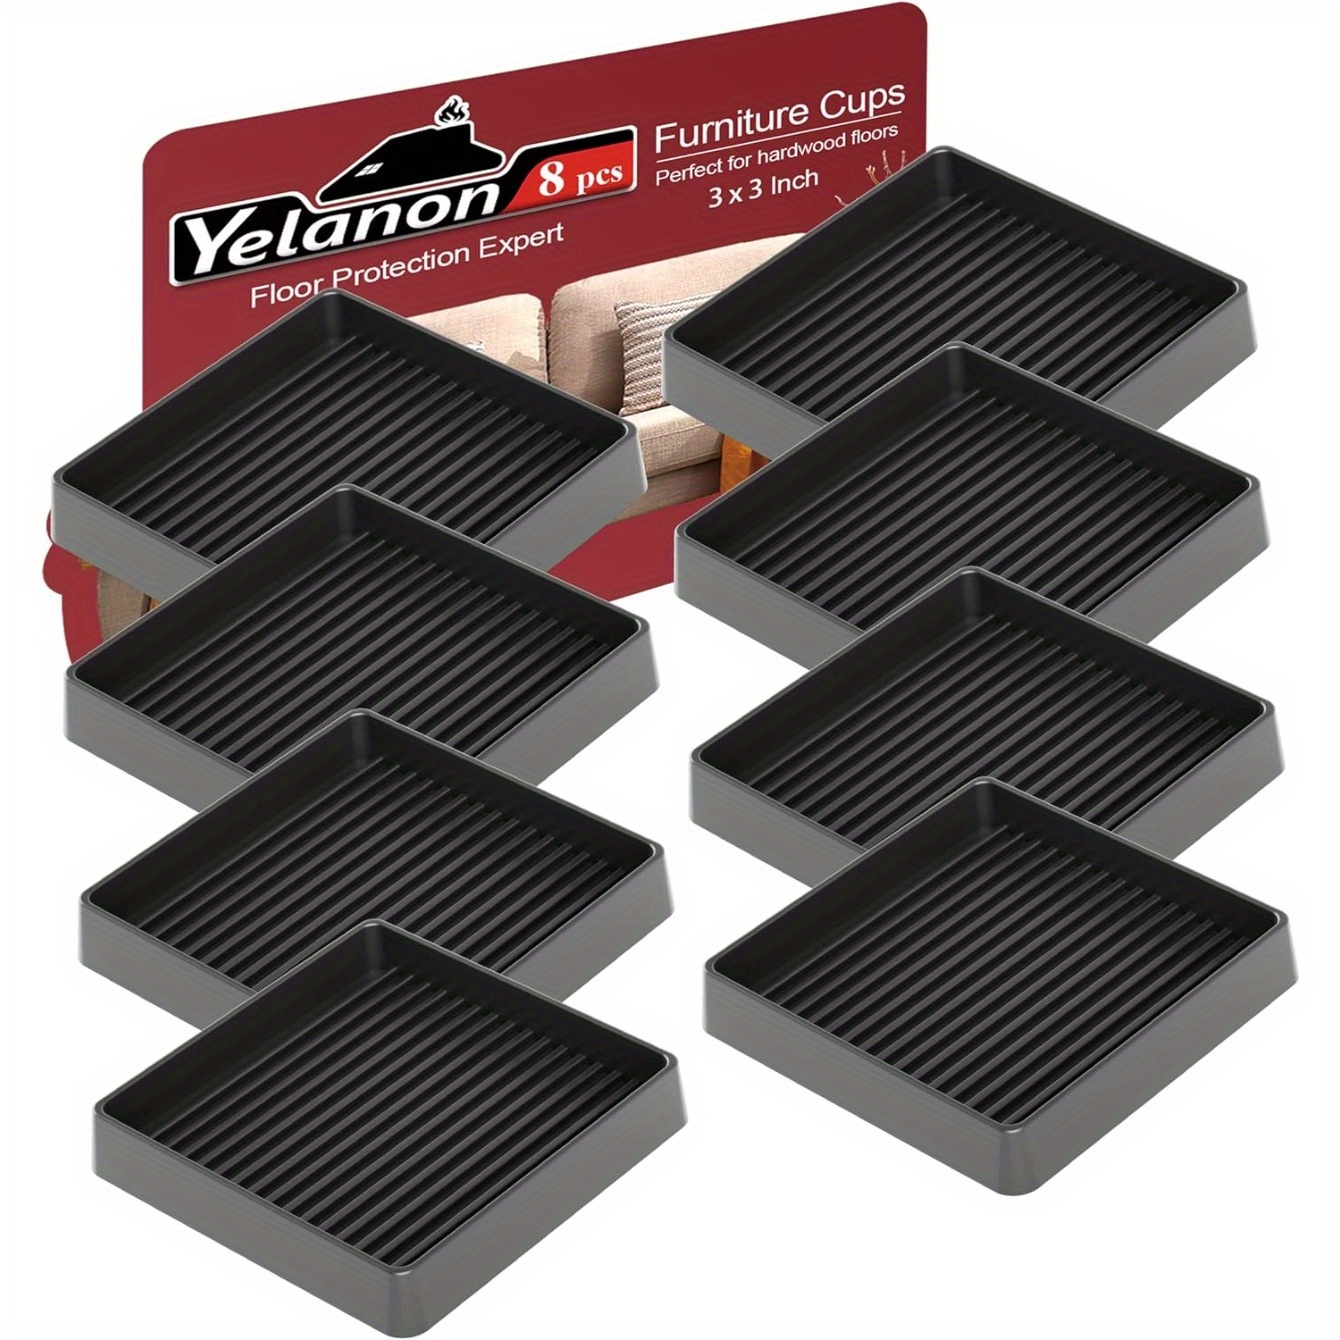 

Yelanon Furniture Coasters, 8 Pcs 3" Furniture Caster Cups - Non Slip Furniture Pads Hardwoods Floors - Non Skid Furniture Grippers, Rubber Feet, Anti Slide Floor Protector For Bed Couch Stoppers